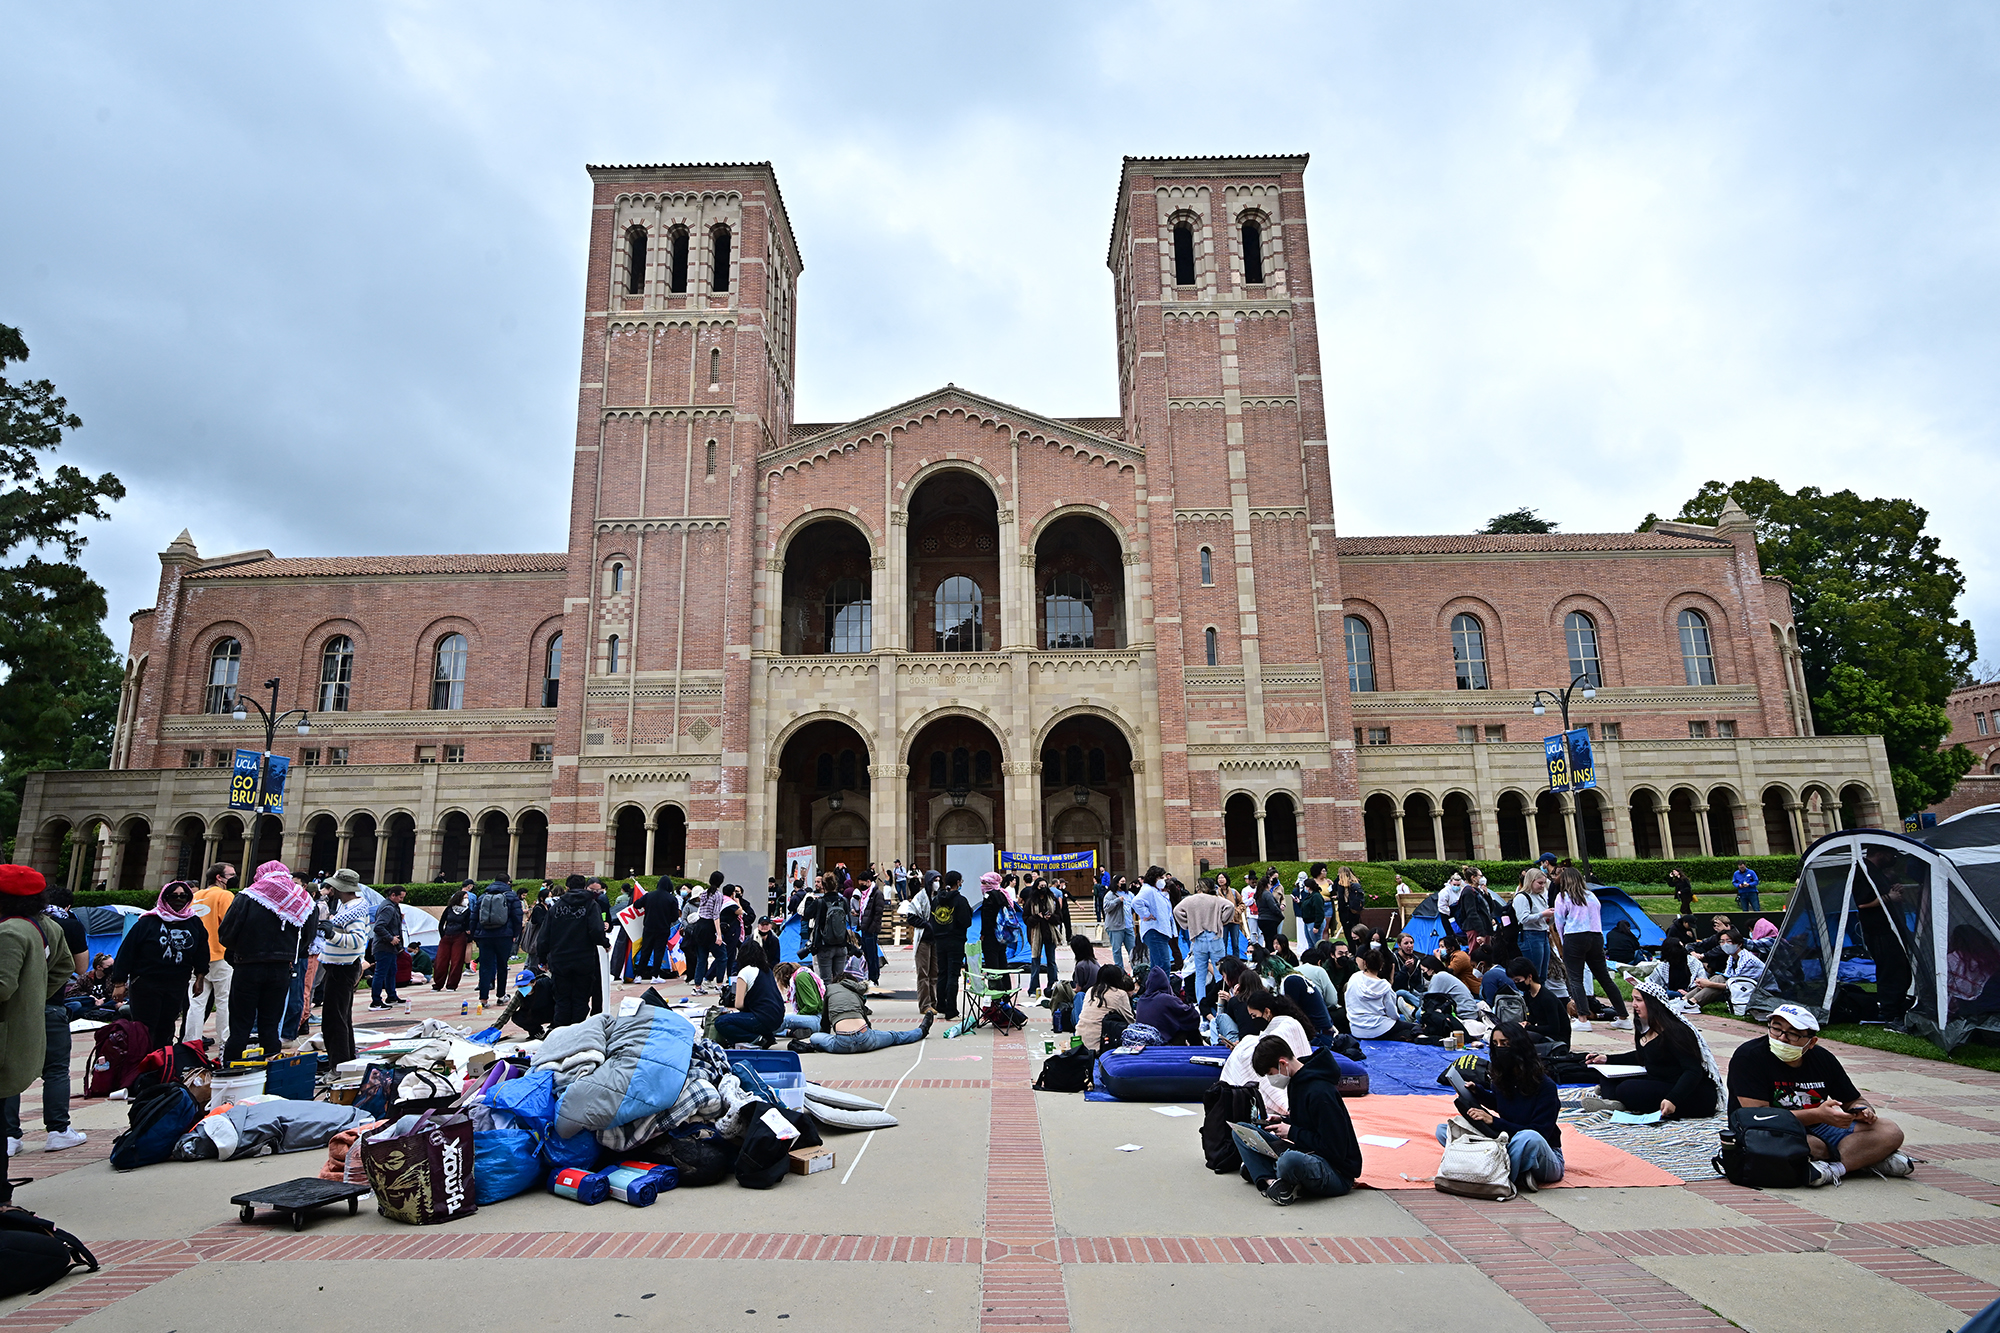 Pro-Palestinian students and activsts gather on the plaza in front of Royce Hall at the University of California Los Angeles on April 25.